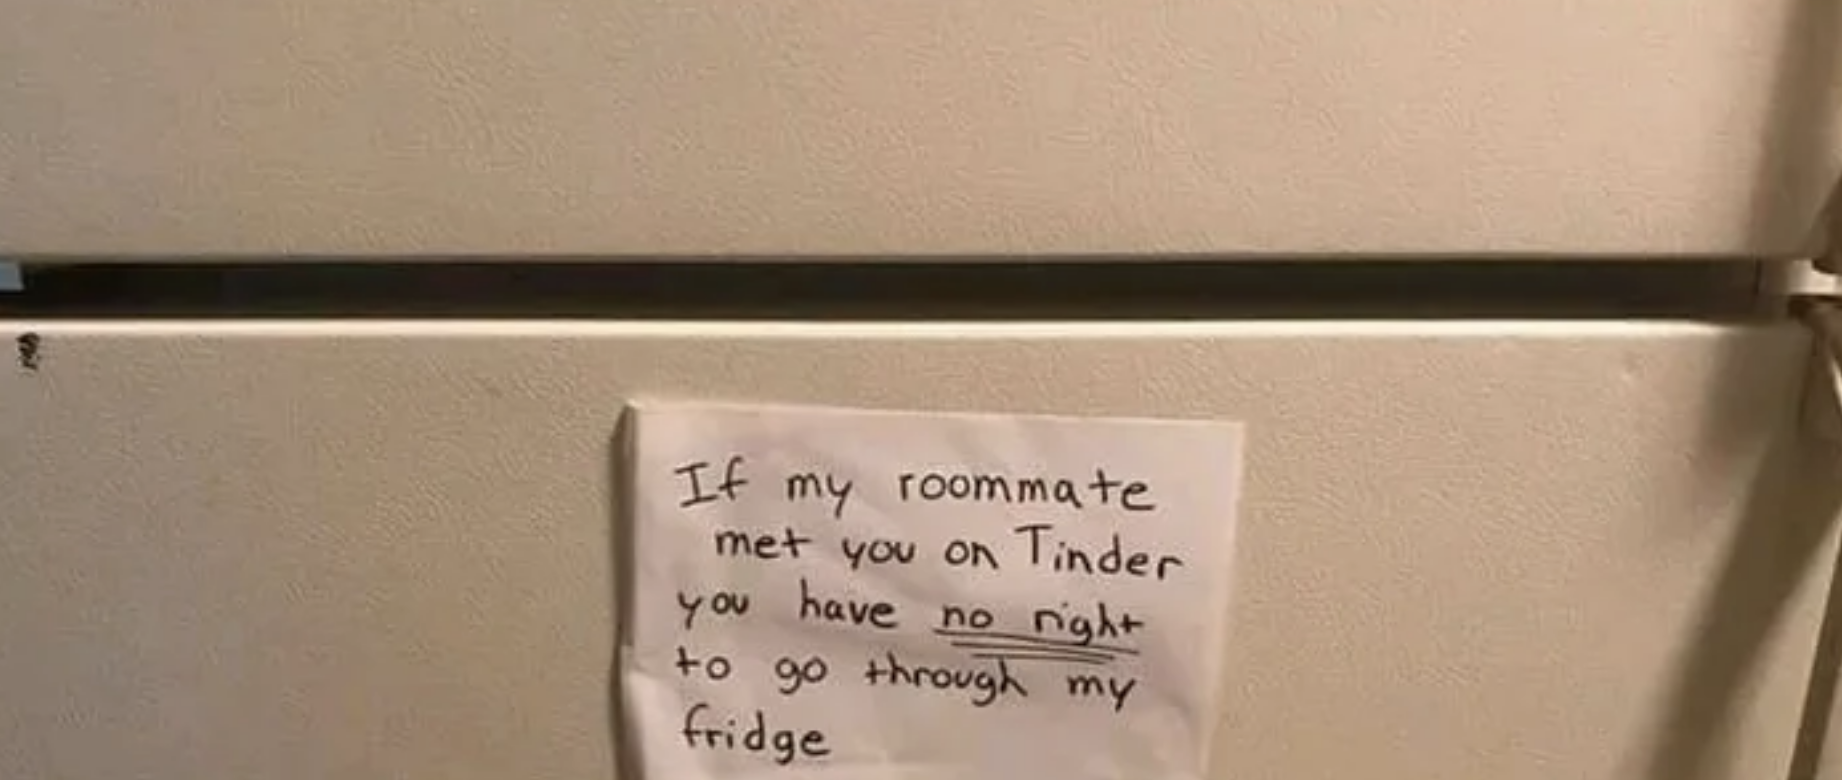 A handwritten note on a fridge saying, &quot;If my roommate met you on Tinder you have no right to go through my fridge.&quot;